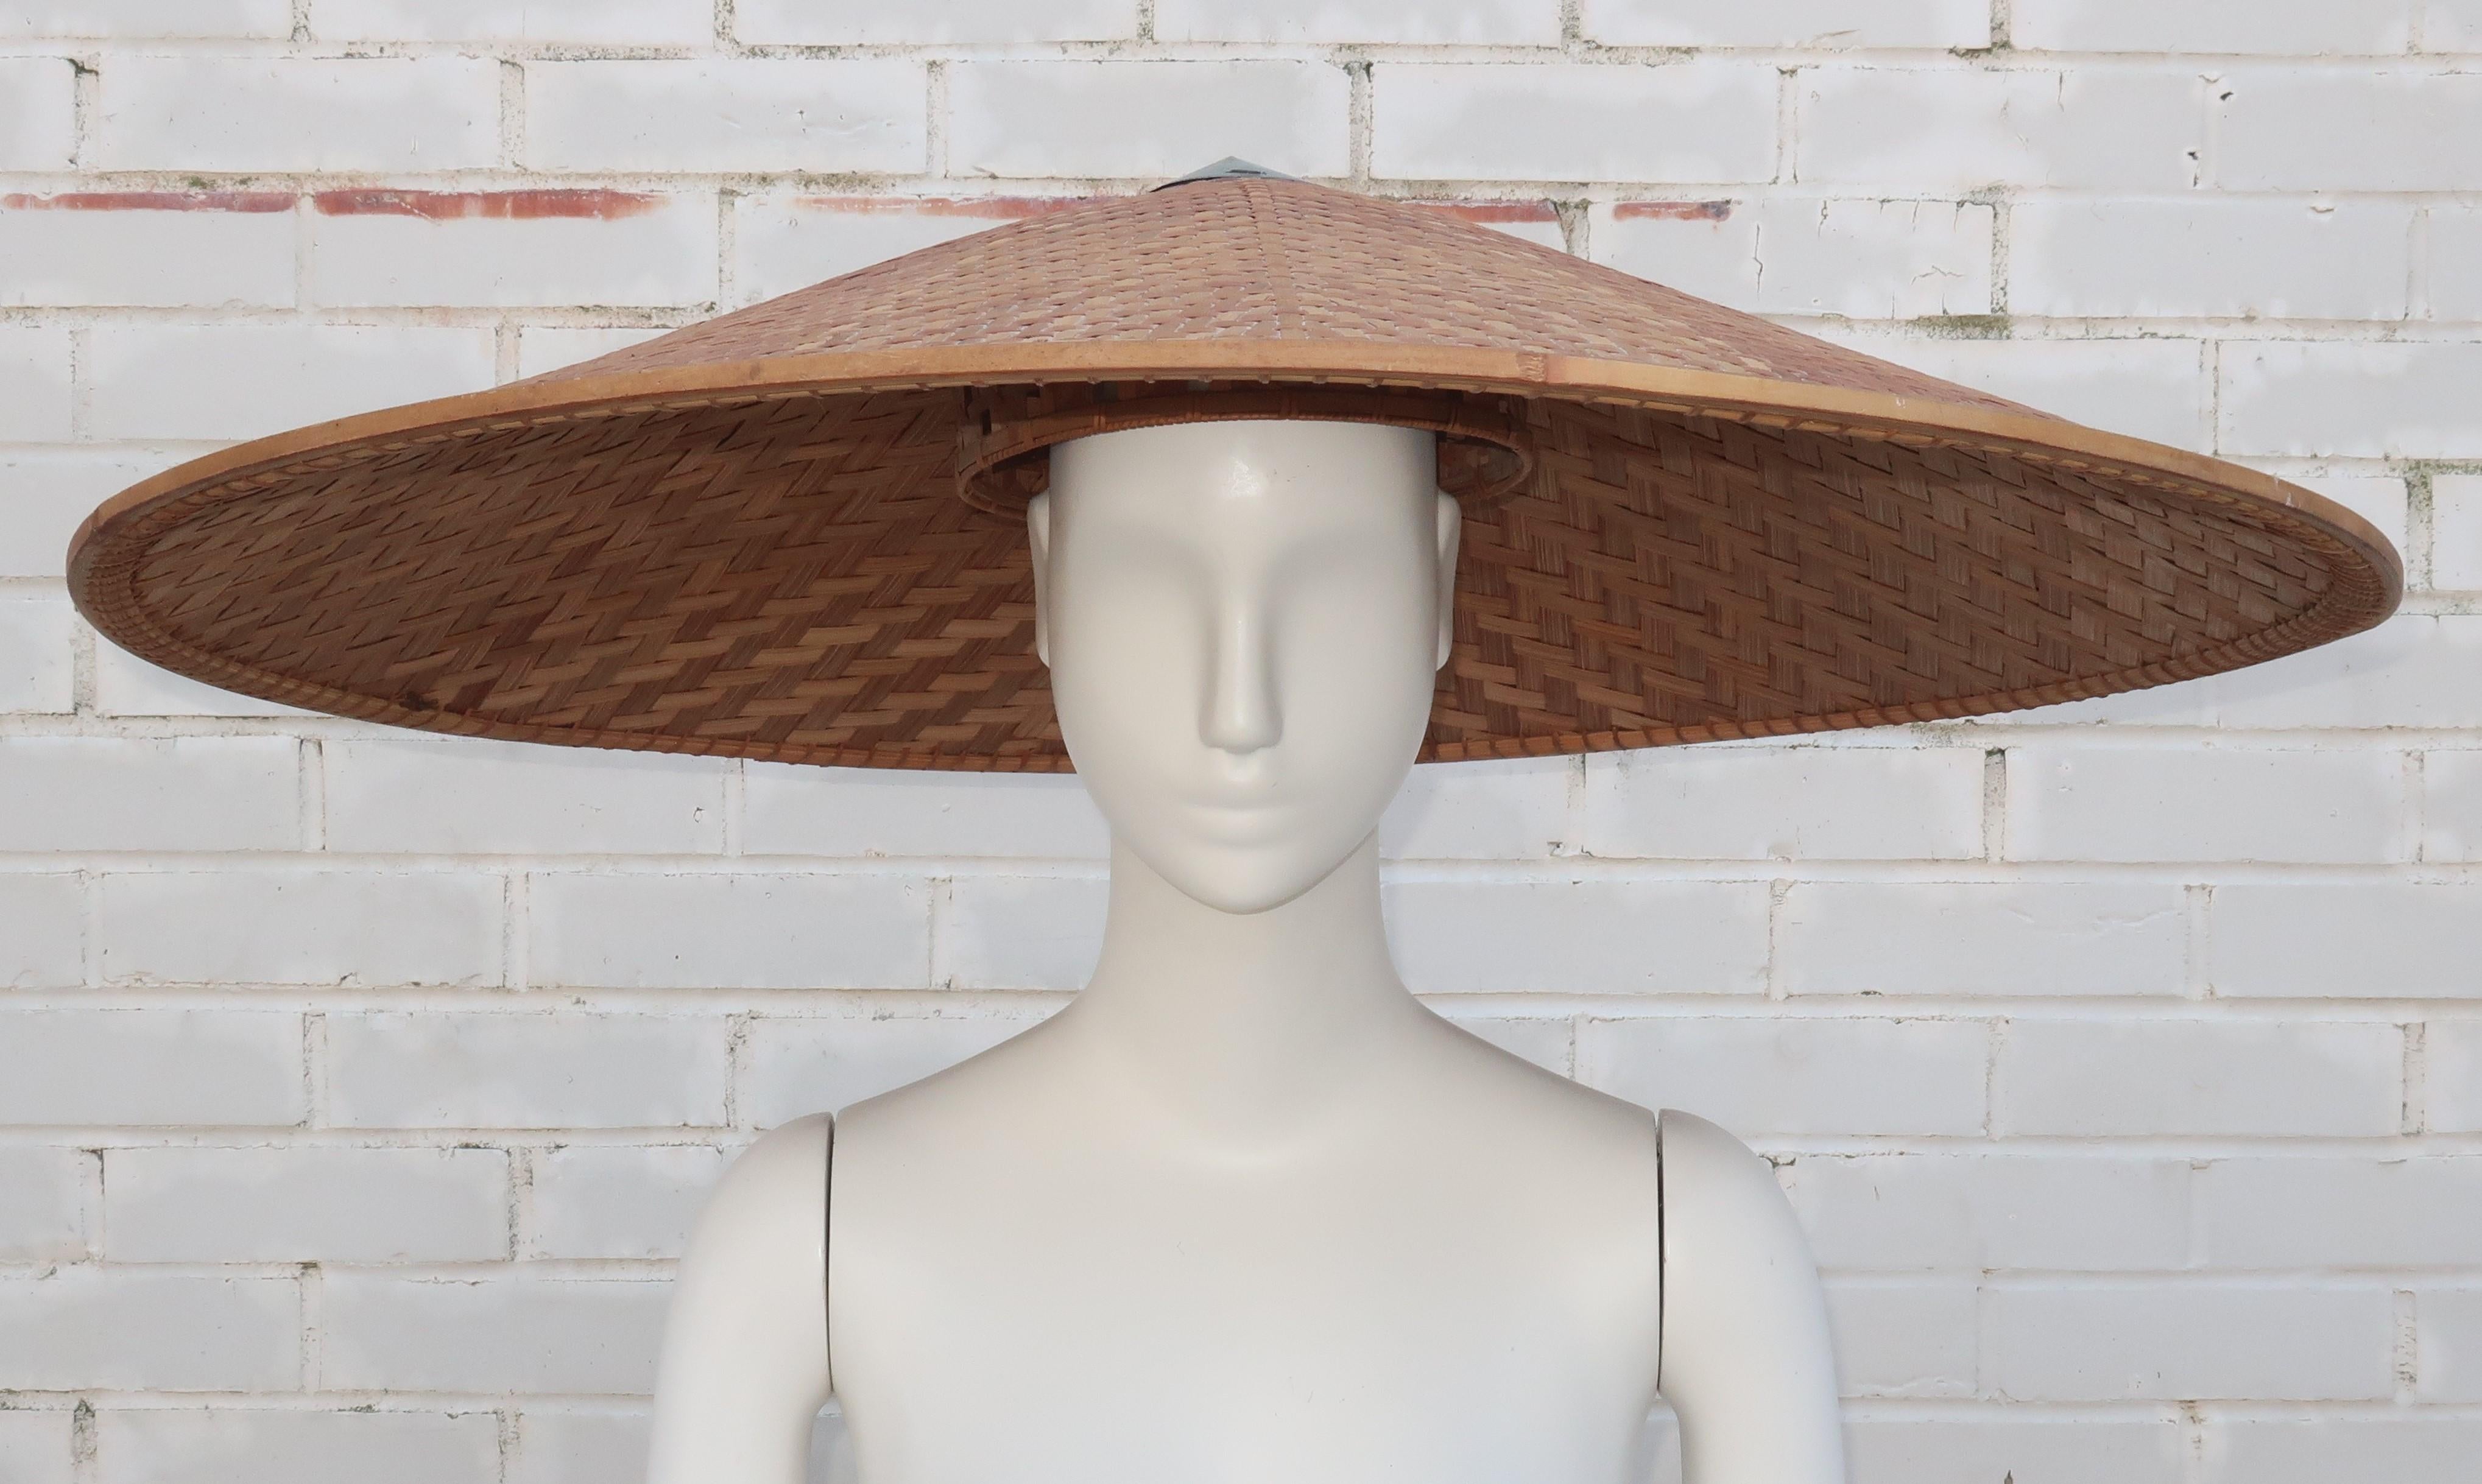 Large Novelty Wicker Straw Pagoda Beach Hat, 1950's In Good Condition For Sale In Atlanta, GA